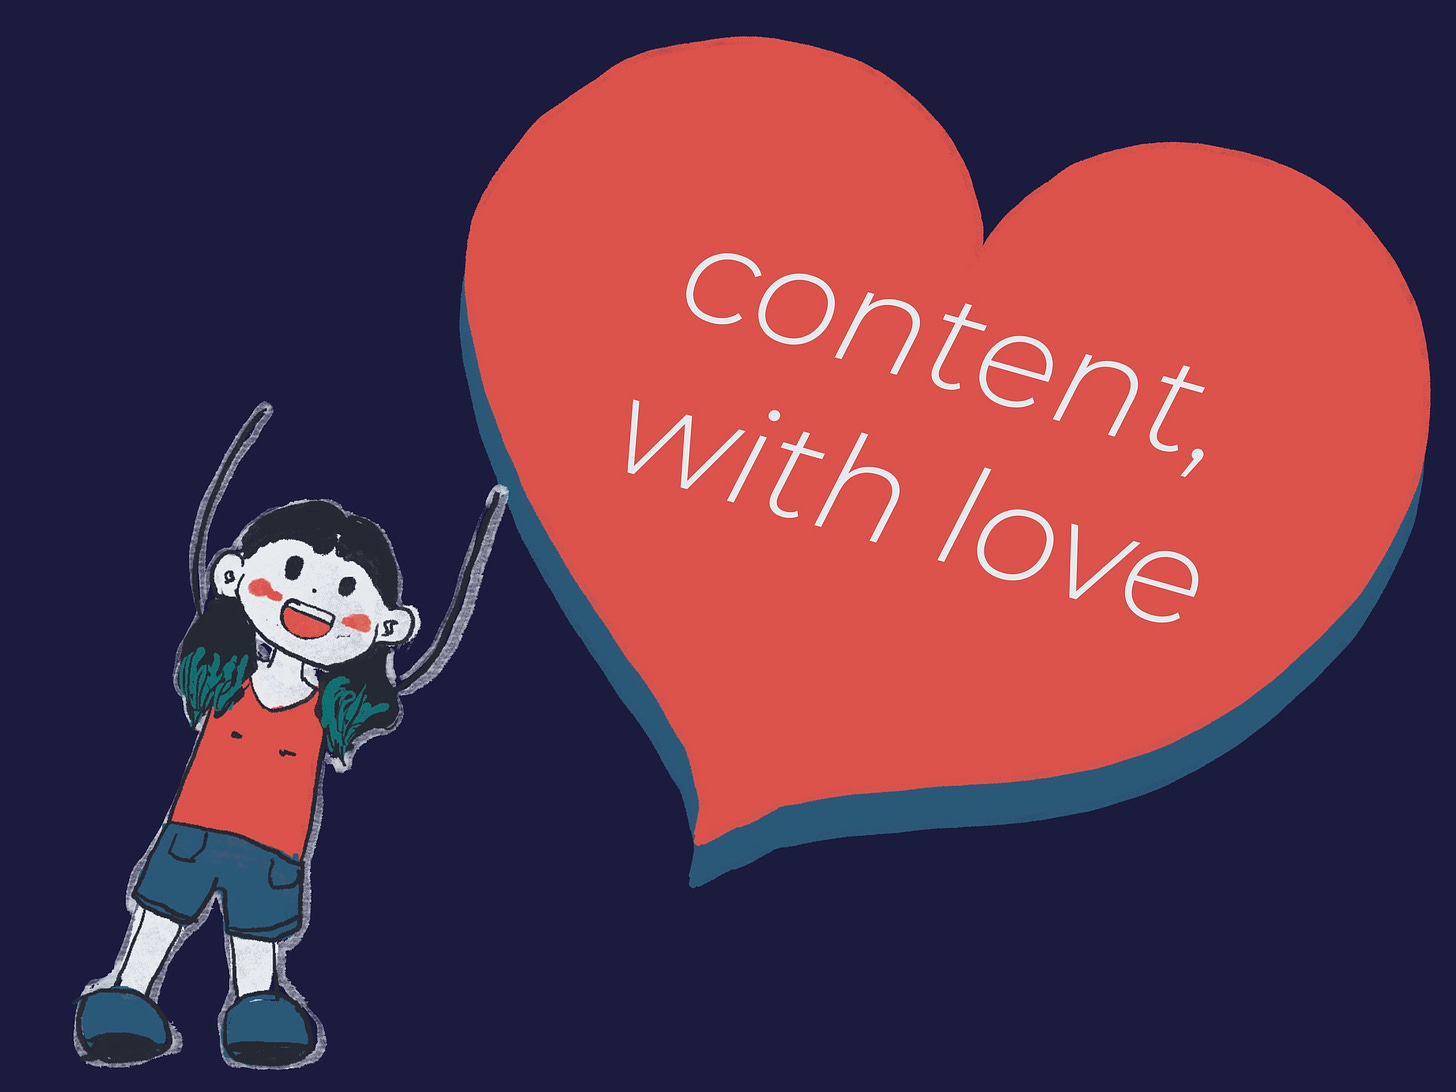 An illustration of a giant red heart with text on top of it that says "content, with love." In the corner there's a crude drawing of a half-stick figure woman happily throwing her arms up in the air and smiling.